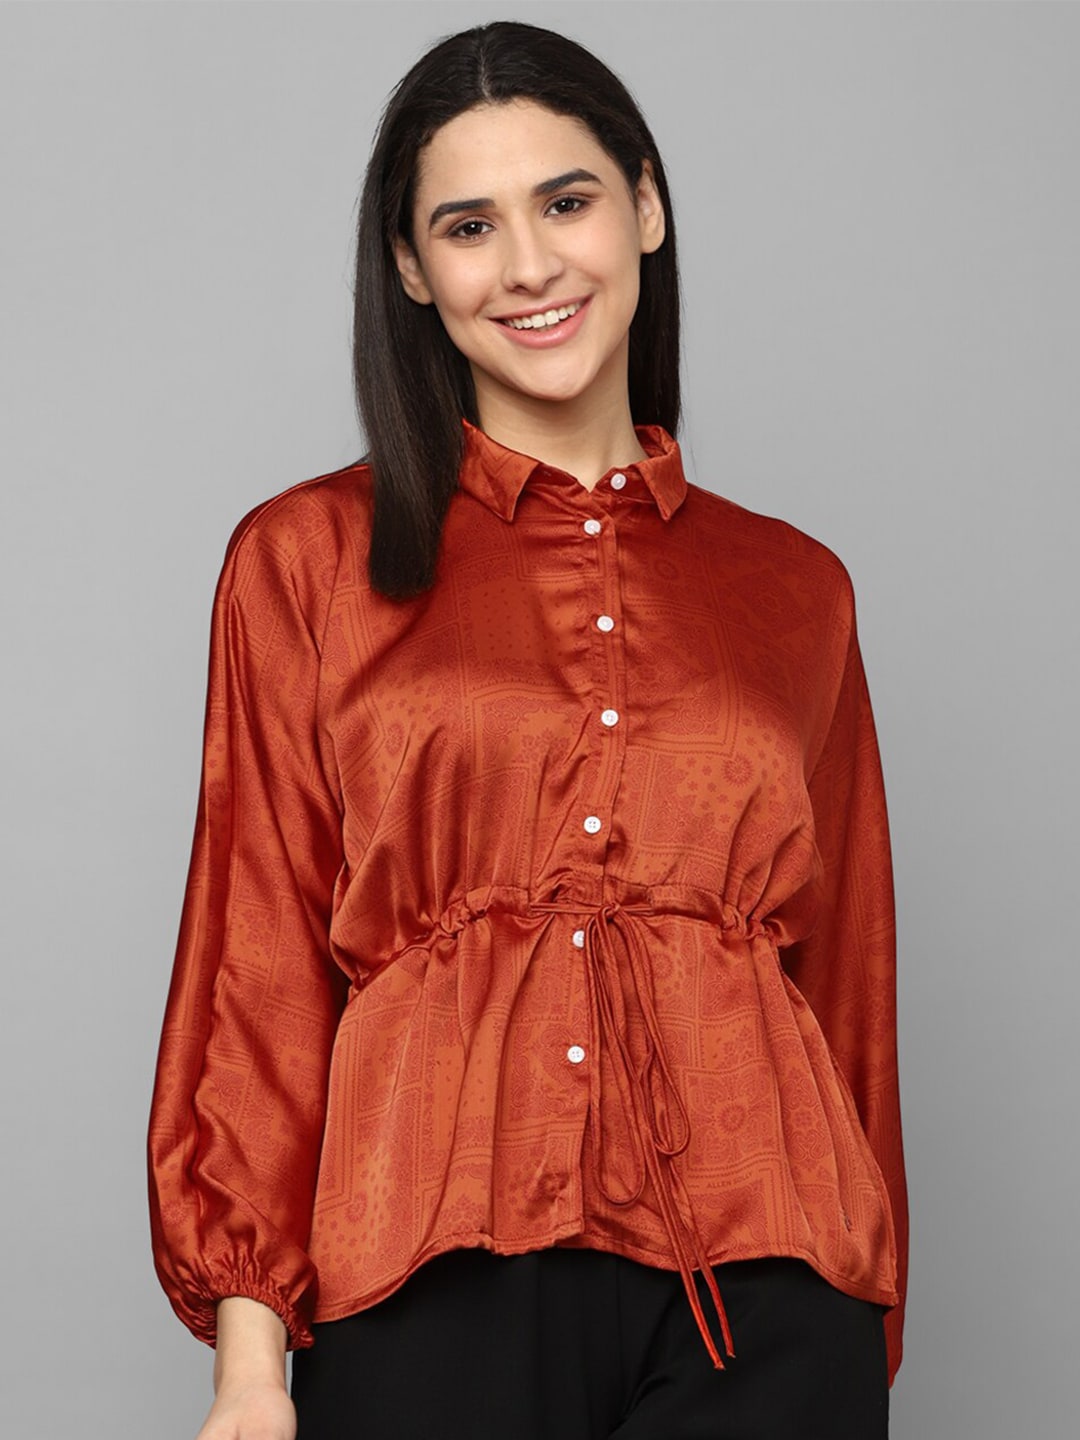 Allen Solly Woman Shirt Collar Shirt Style Top Price in India